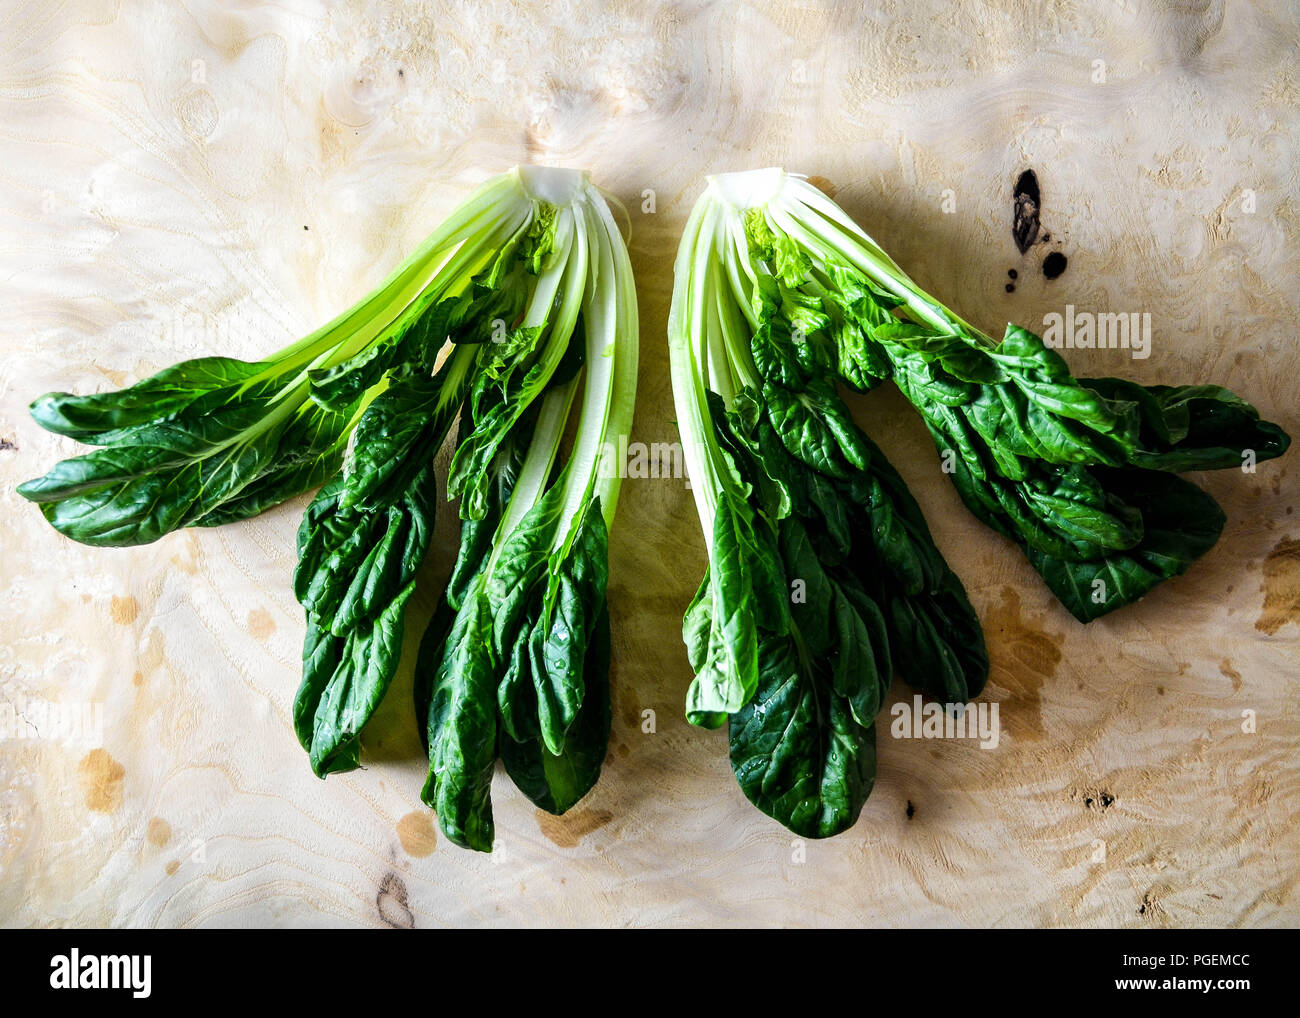 A head of tatsoi (Brassica rapa subsp. narinosa), aka rosette bok choy or spoon mustard, shown in cross-section against a burl-wood background. Stock Photo